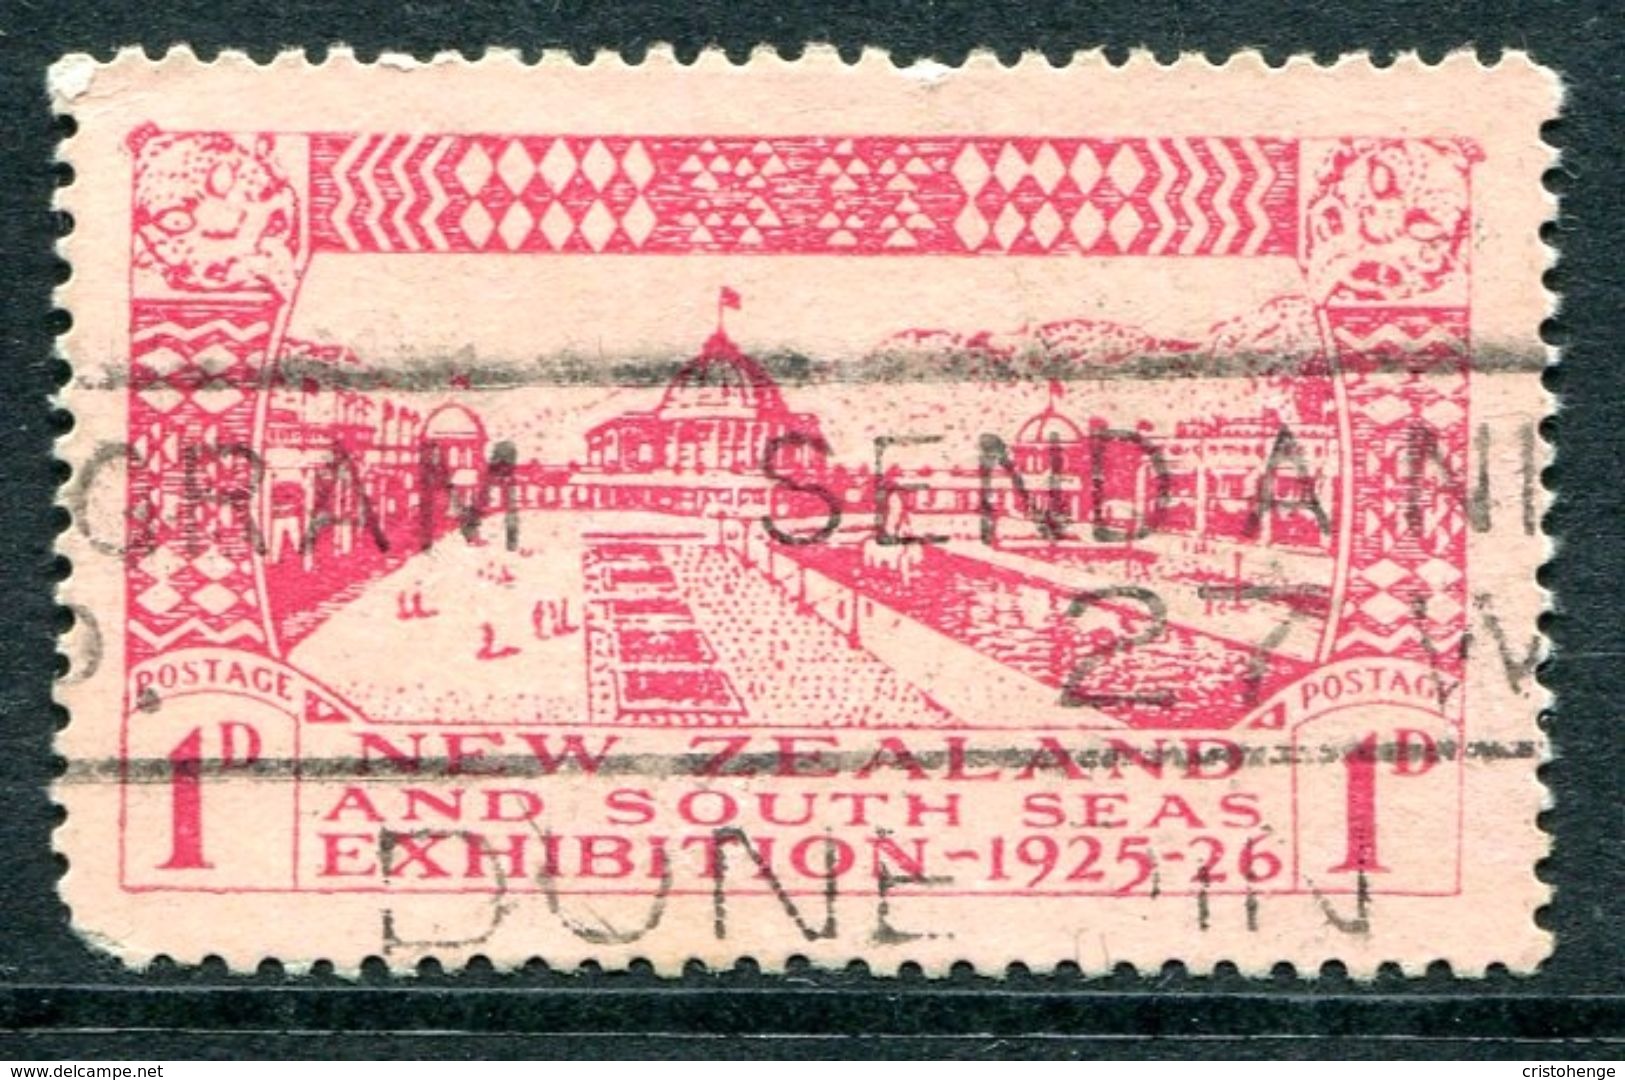 New Zealand 1925 Dunedin Exhibition - 1d Carmine Used (SG 464) - Used Stamps